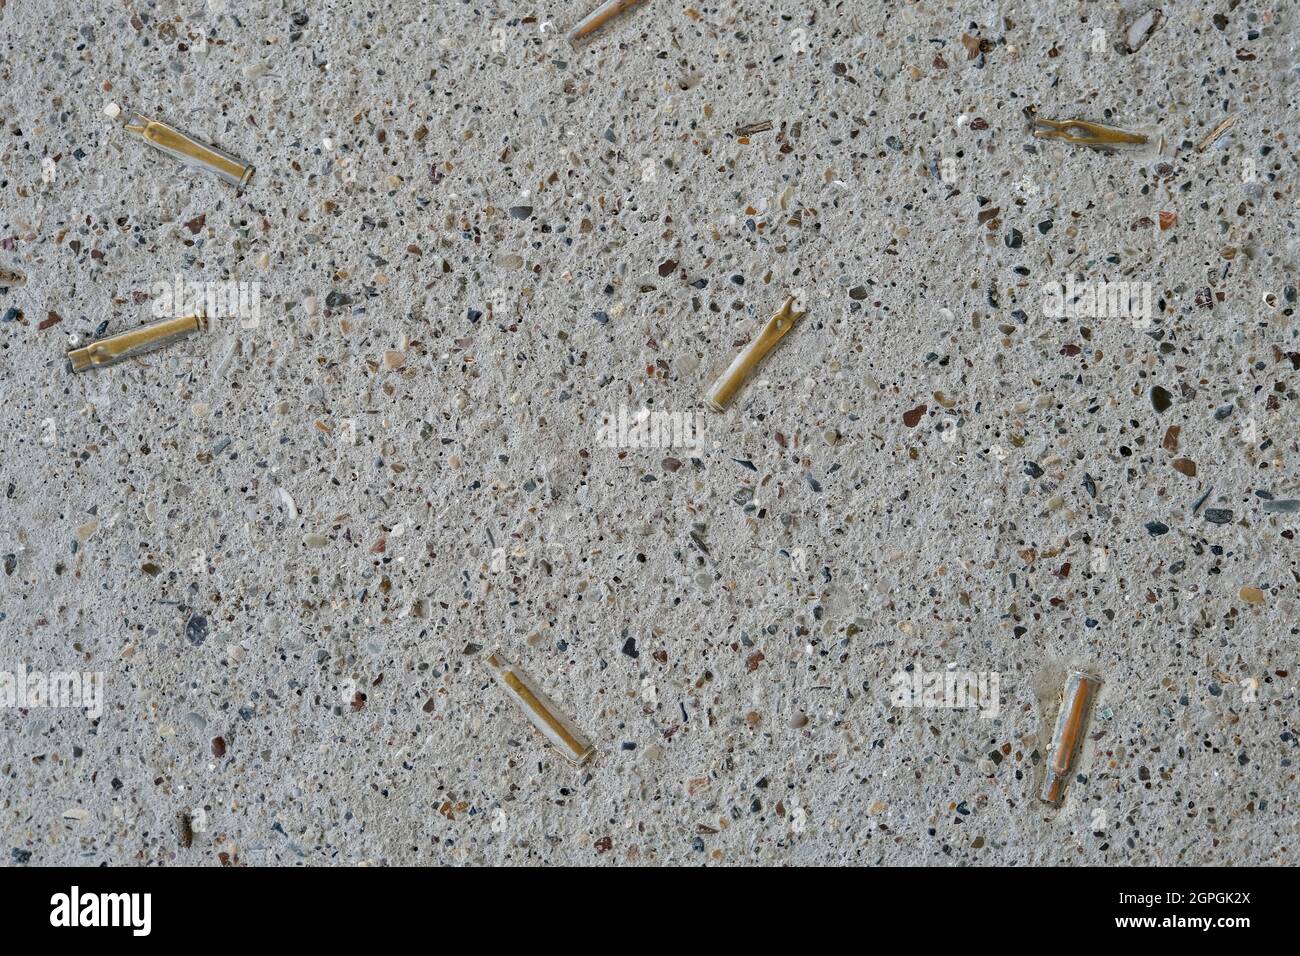 Croatia, Slavonia, Ovcara, the Ovcara memorial (Spomen Dom Ovcara), rifle bullets embedded in the ground, November 20, 1991, 264 people from Vukovar hospital will be tortured and executed by Serbian forces, 7 people will be indicted by the ICTY for crimes against humanity and war crimes Stock Photo